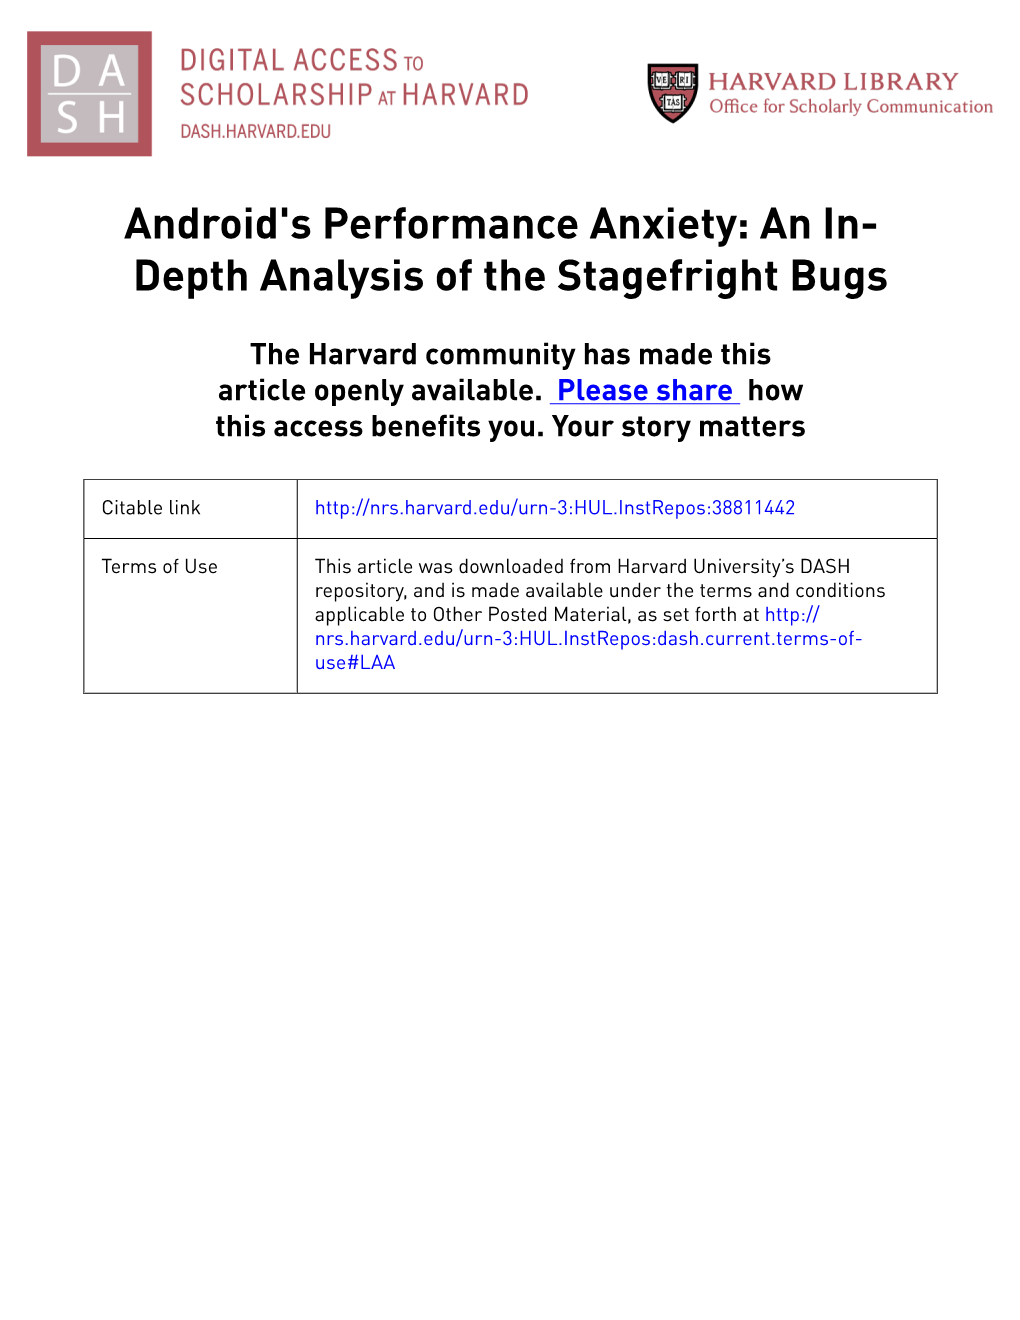 Android's Performance Anxiety: an In- Depth Analysis of the Stagefright Bugs